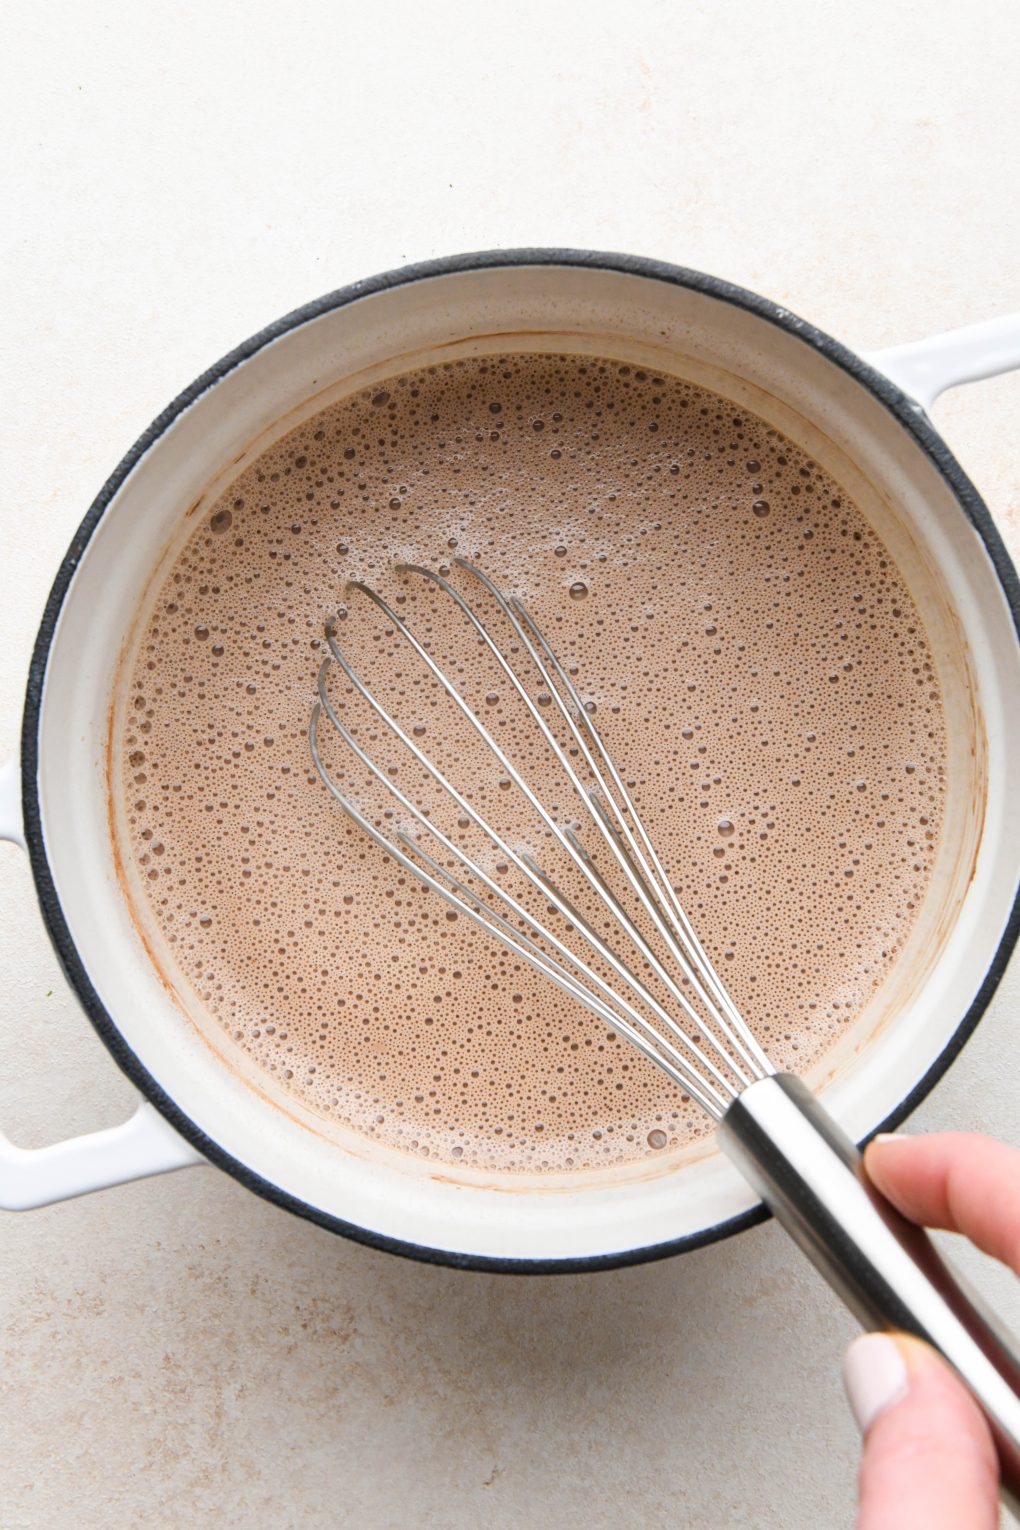 How to make peppermint hot chocolate. Milk, extracts, and cacao powder whisked together in small sauce pan.